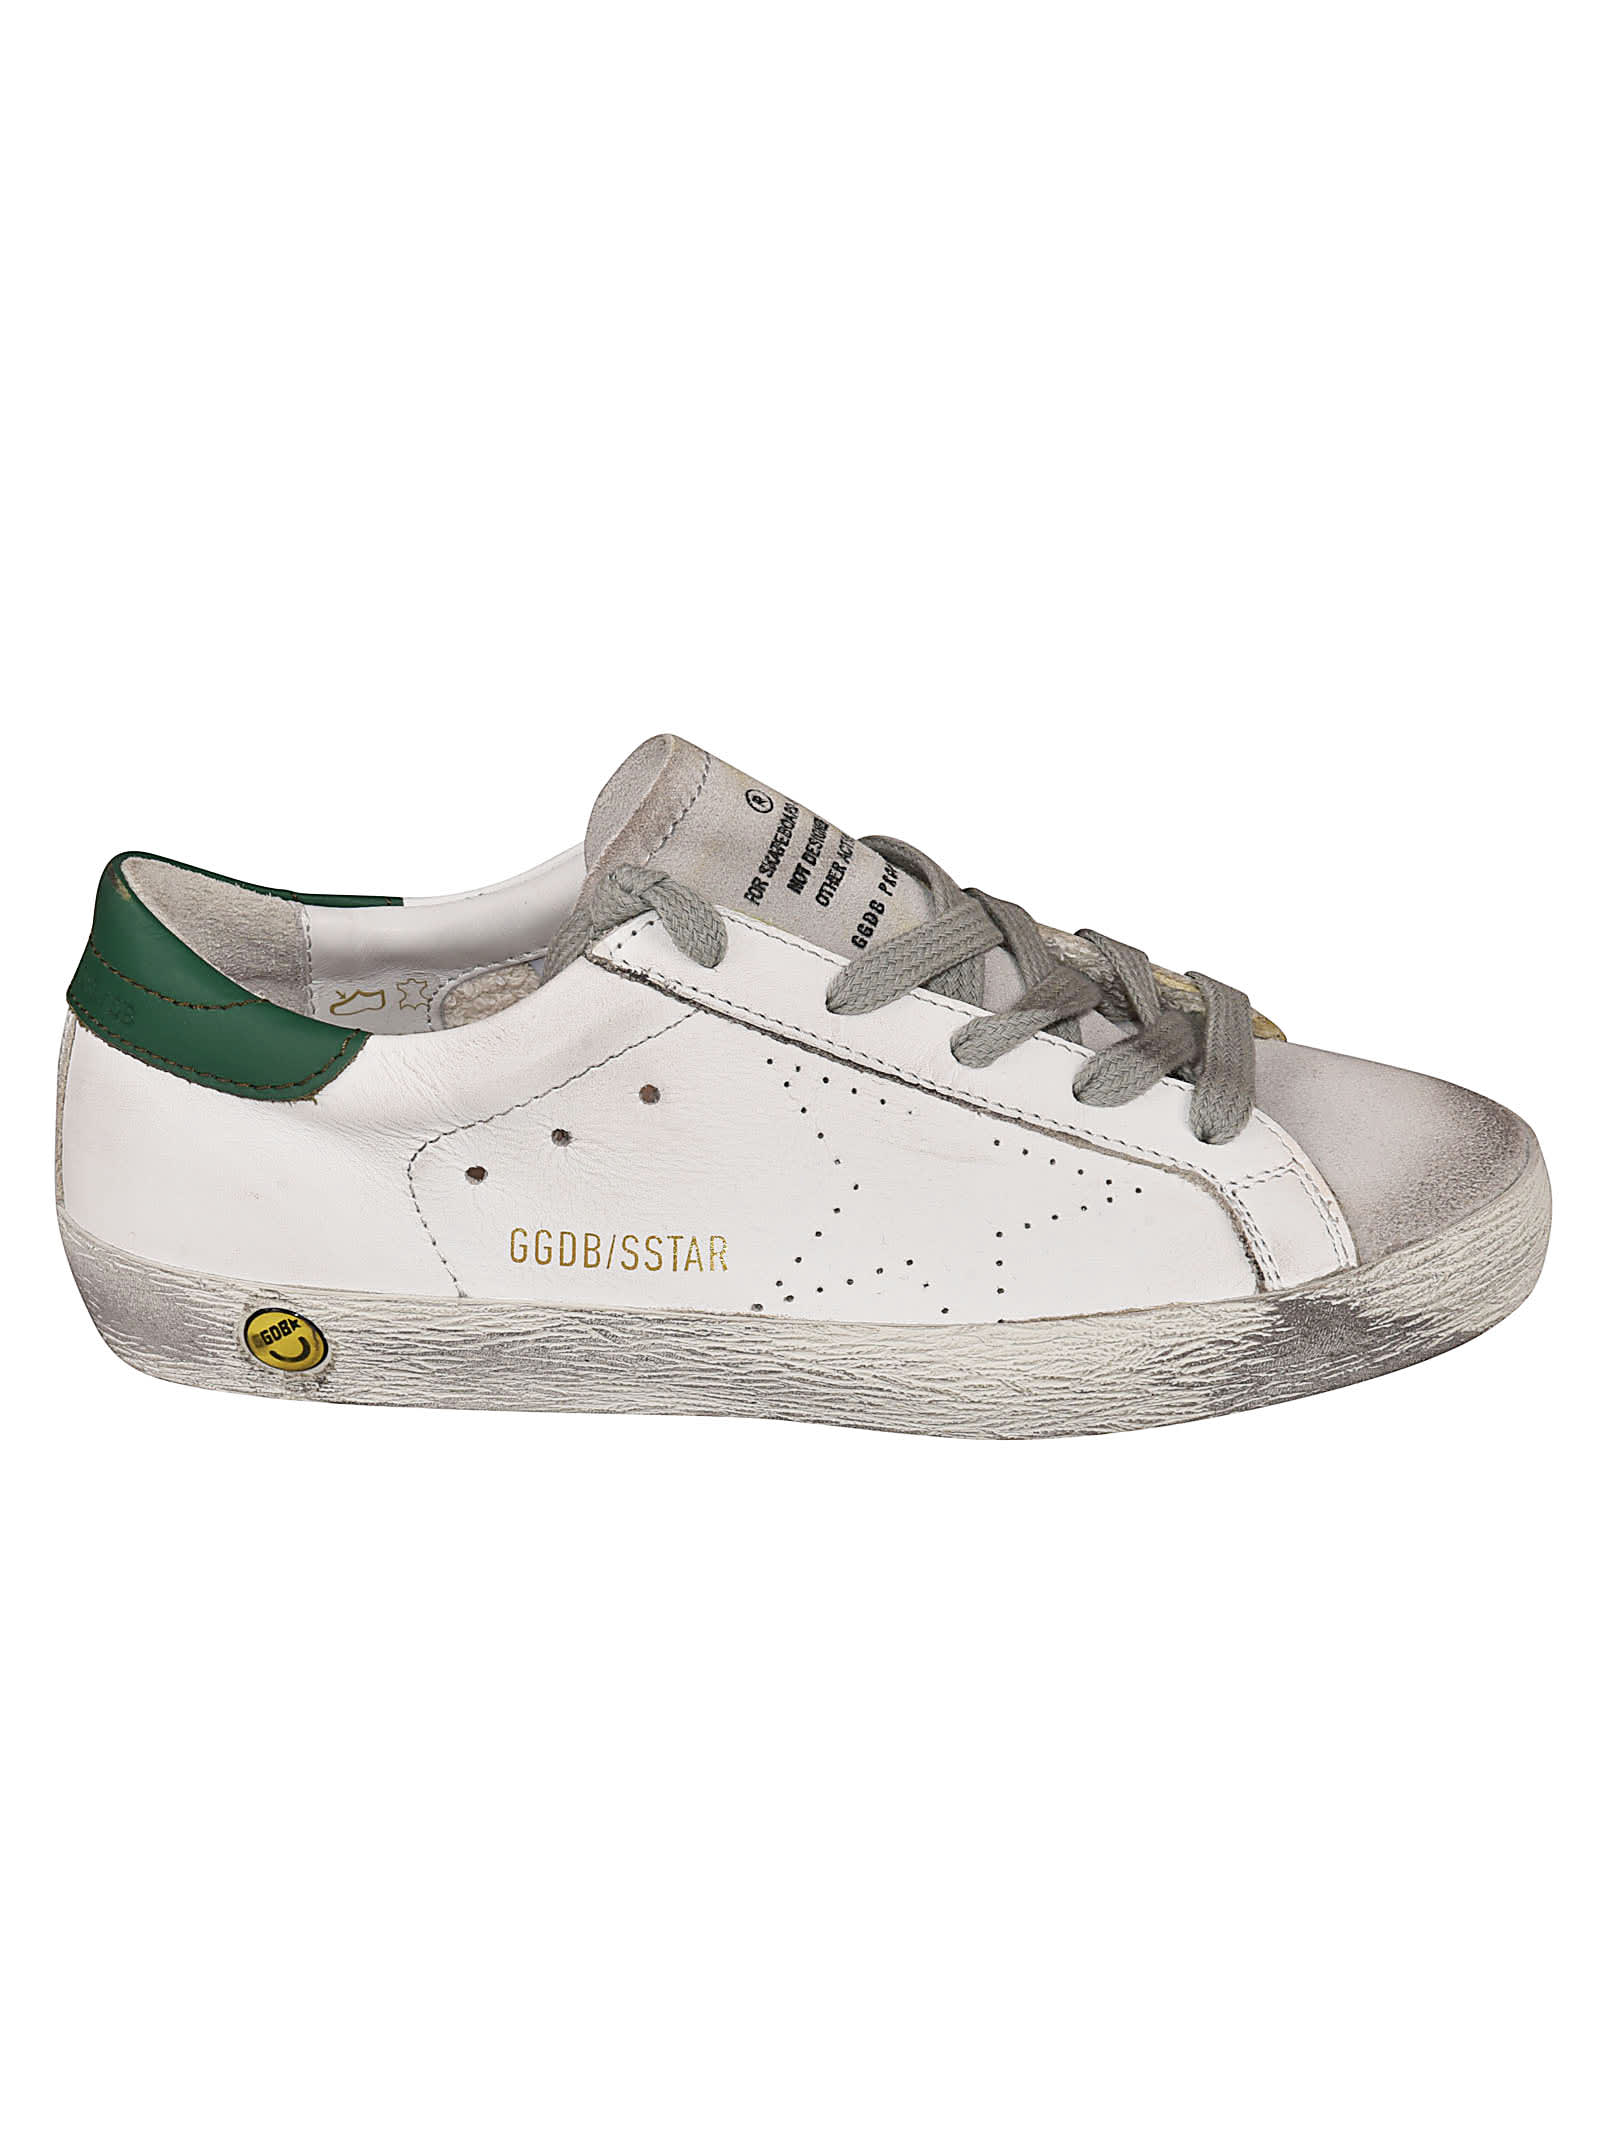 green goose shoes